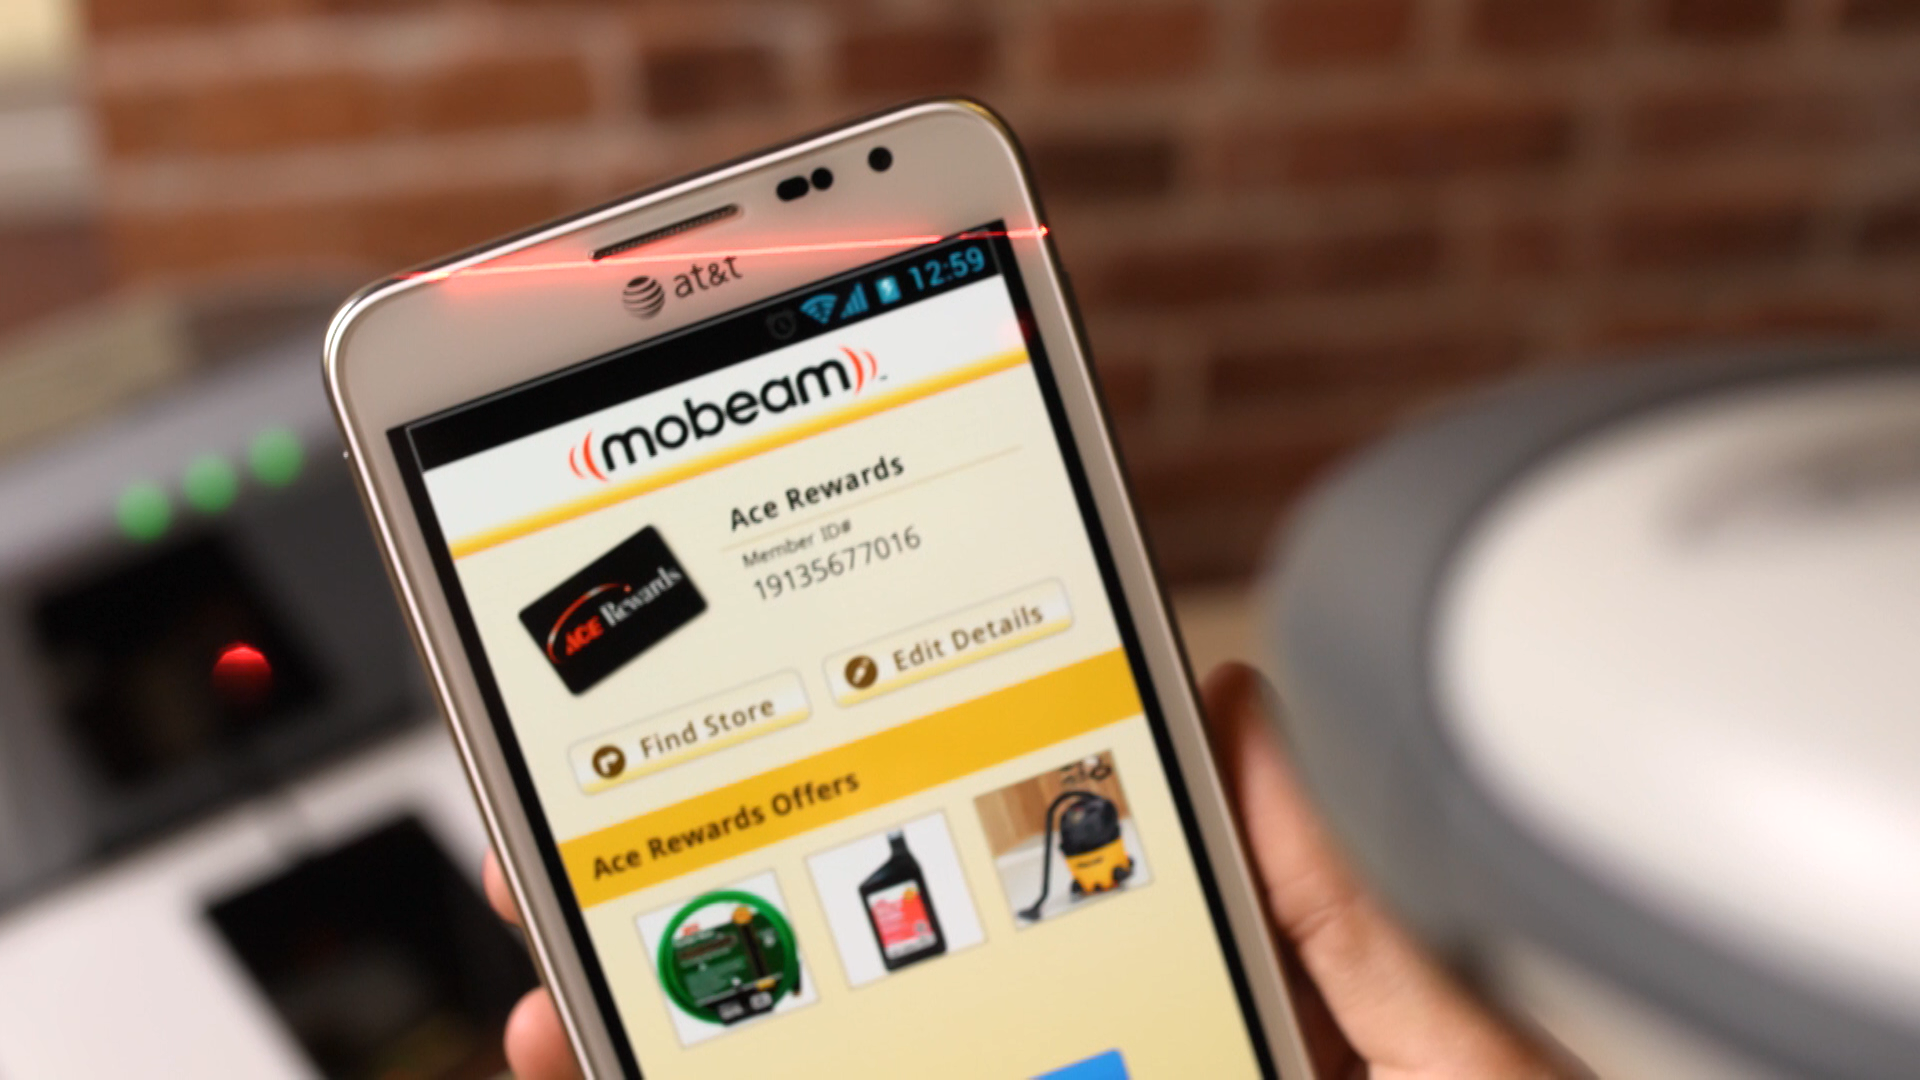 The Samsung Galaxy S4 features Mobeam technology that lets it work with barcode readers at almost any retailer or venue.